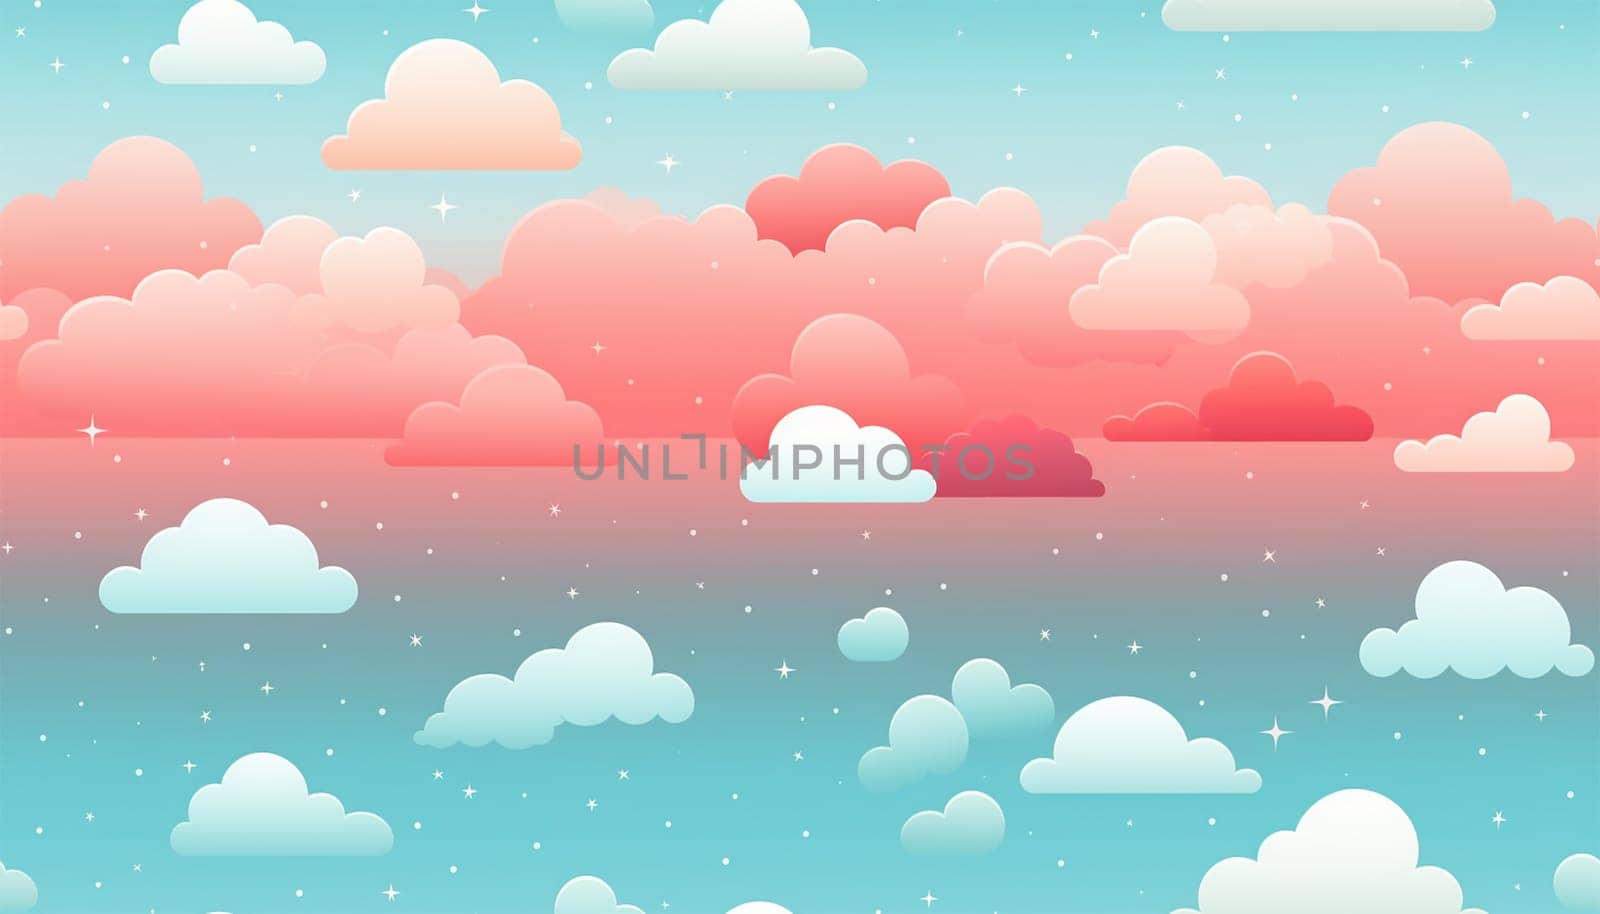 Cute colorful pastel clouds seamless pattern background. Rainbow unicorn background with clouds and stars. Pastel color sky. Magical landscape, abstract fabulous pattern. Cute candy wallpaper. Copy space